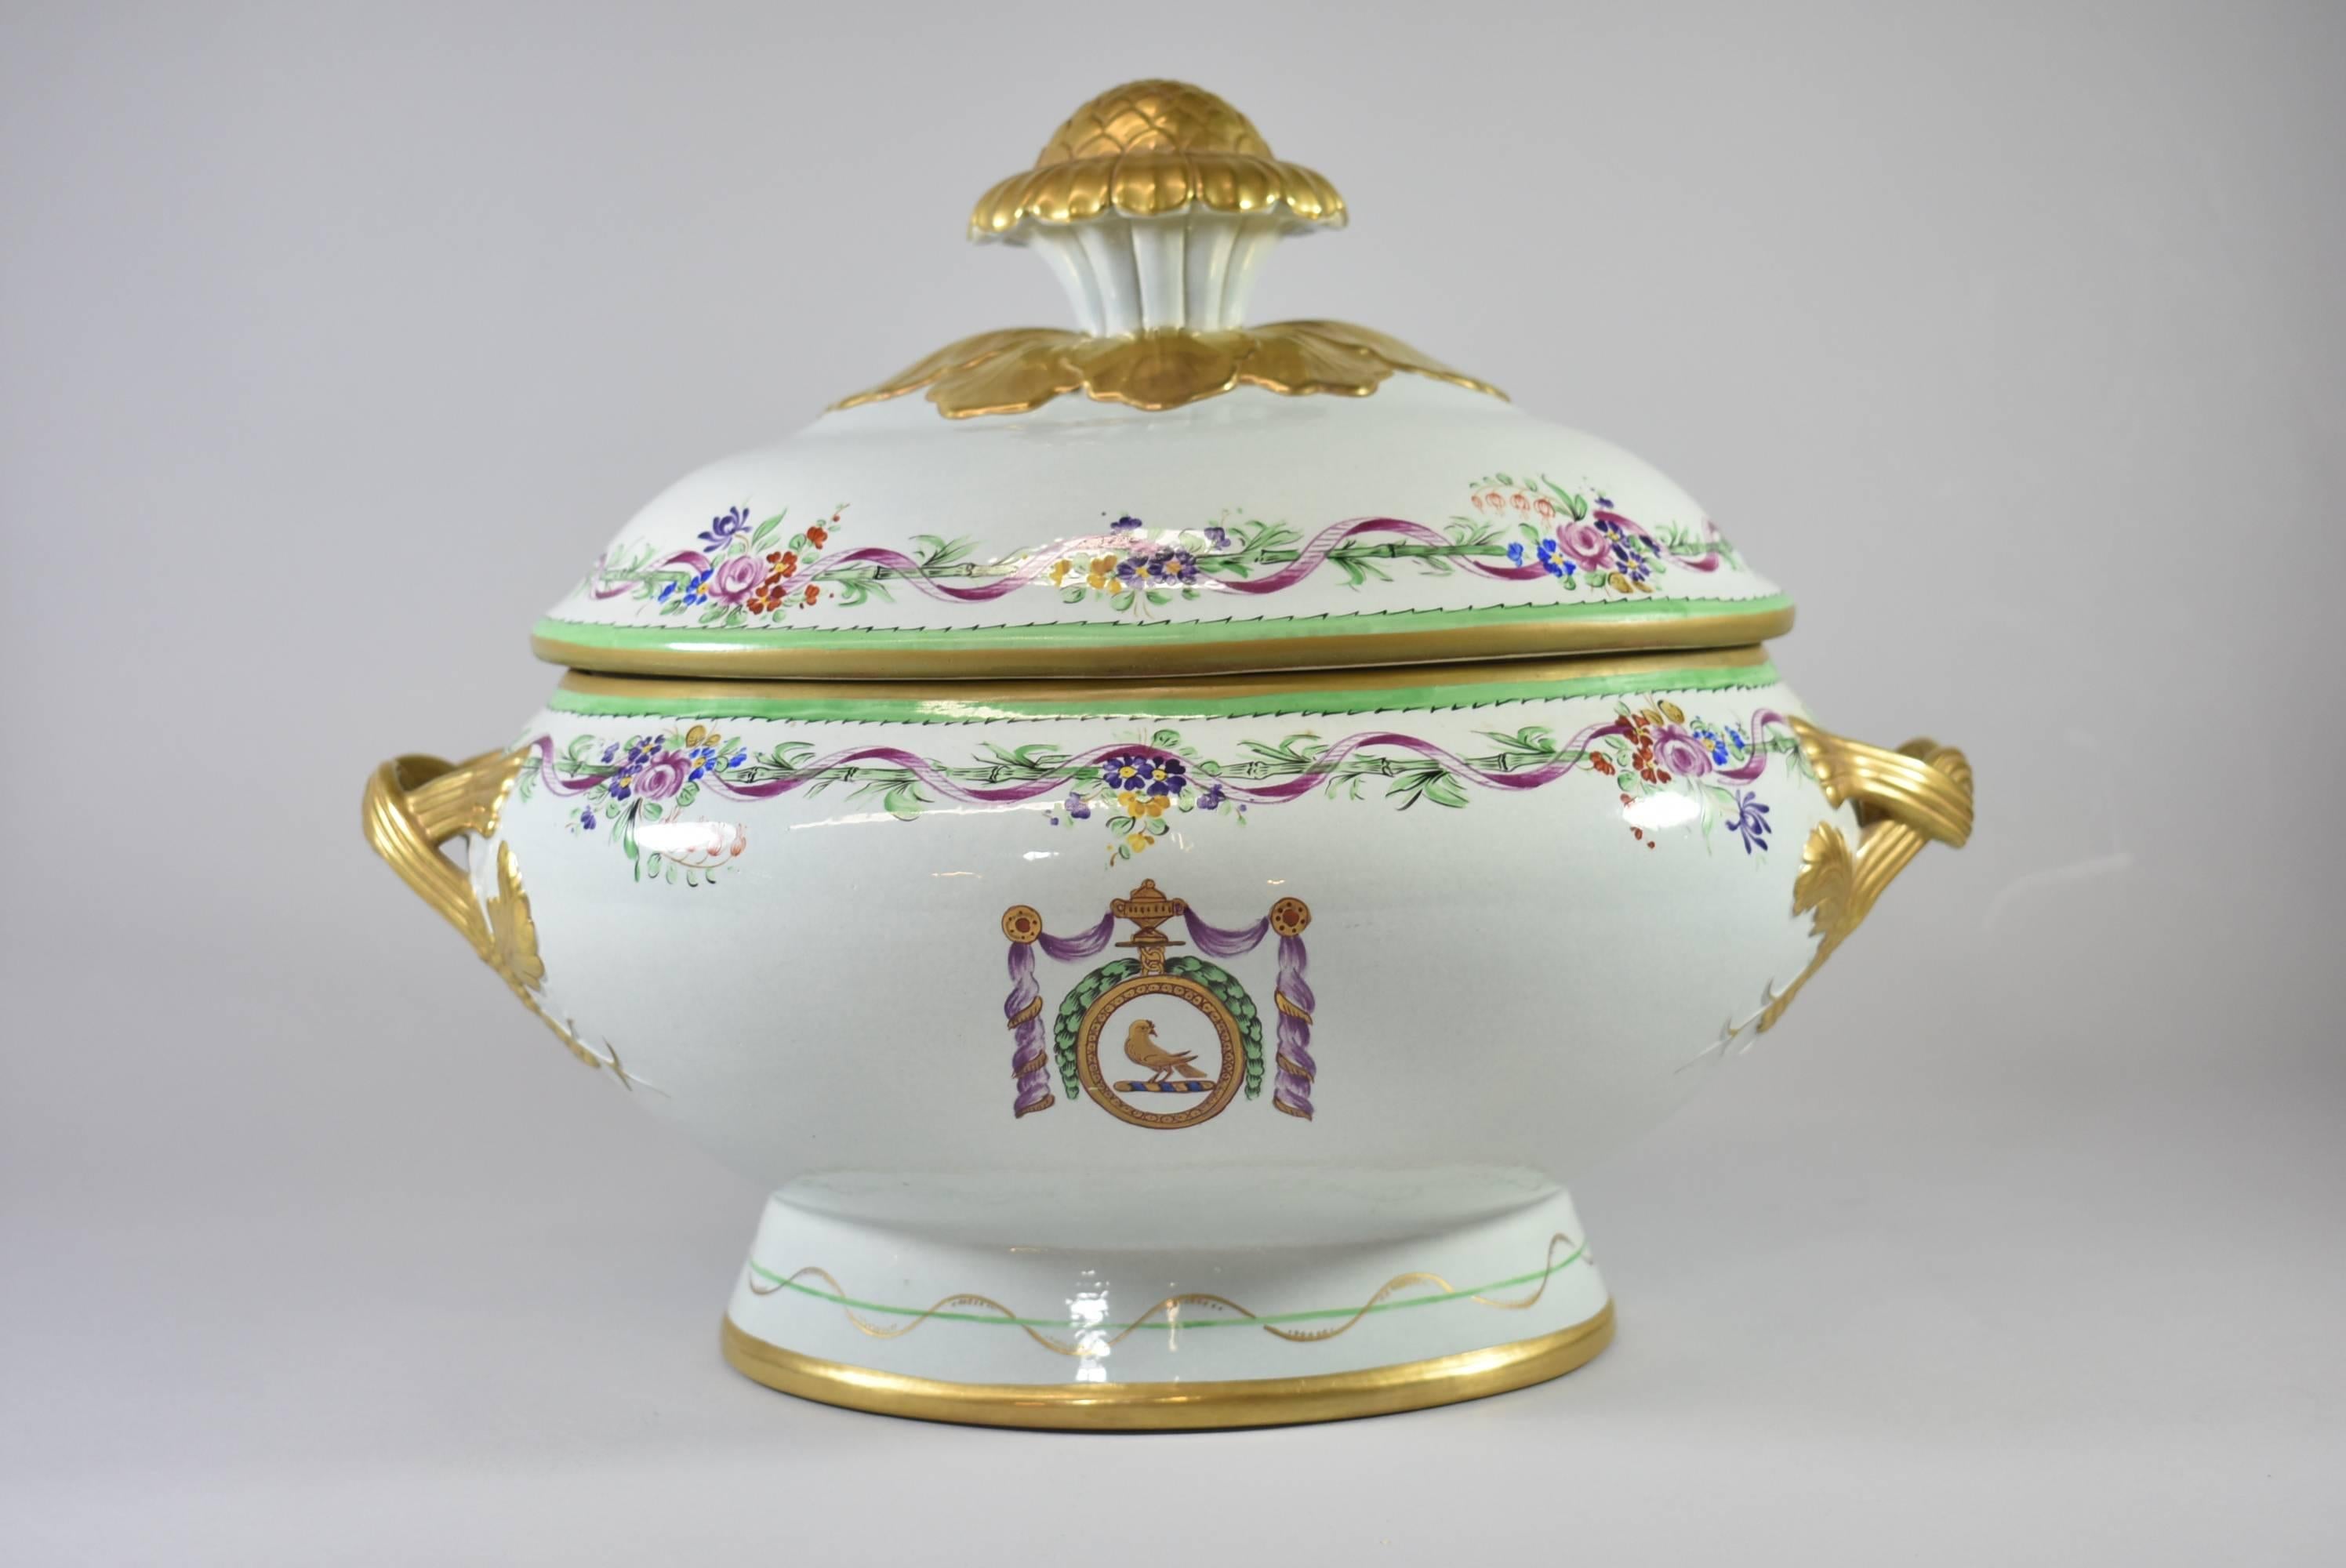 A beautiful lowestoft reproduction soup tureen with underplate by Mottahedeh. This is hand-painted in green, burgundy and gold with central bird medallion. Measures: Underplates is 16.5